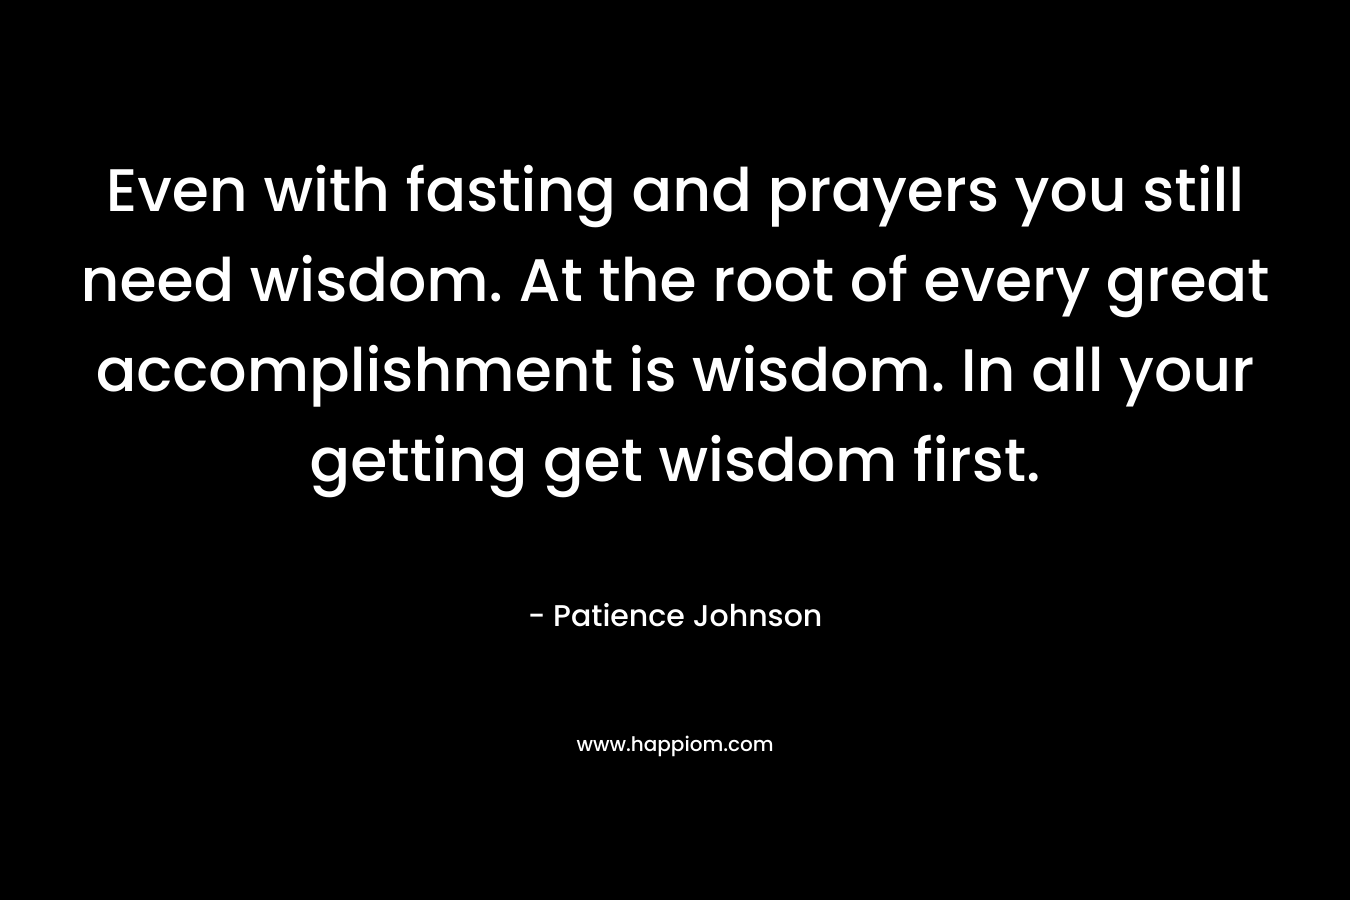 Even with fasting and prayers you still need wisdom. At the root of every great accomplishment is wisdom. In all your getting get wisdom first. – Patience Johnson